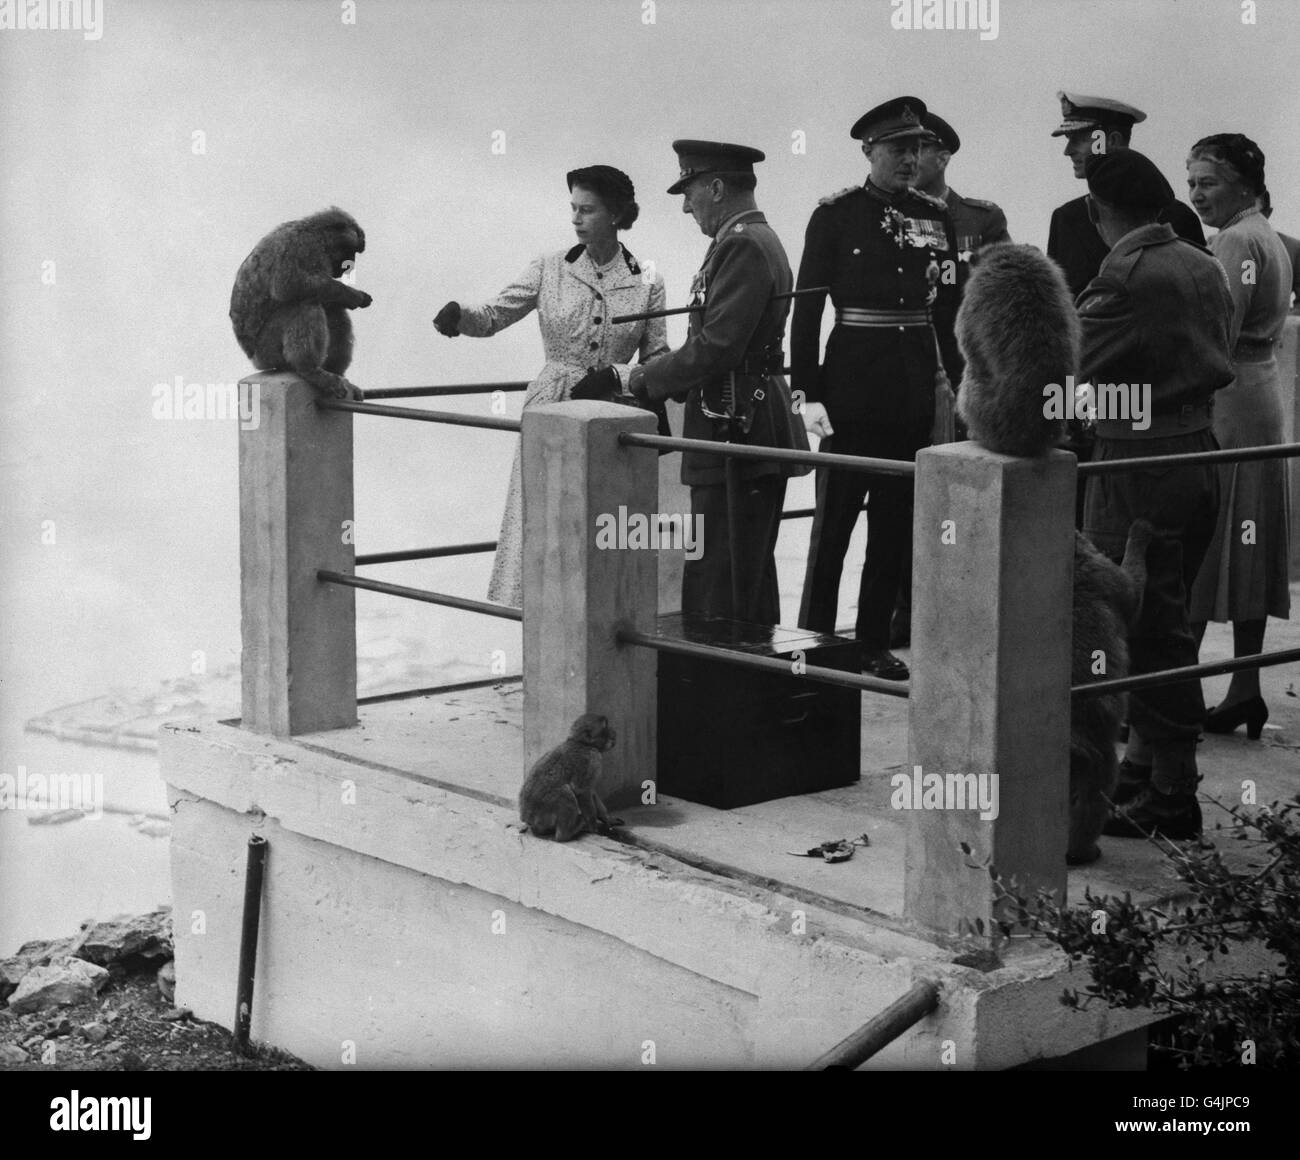 Barbary apes perch on a railing as the Queen and Duke of Edinburgh visit them on the Rock of Gibraltar during their Royal tour of the Commonwealth. Stock Photo